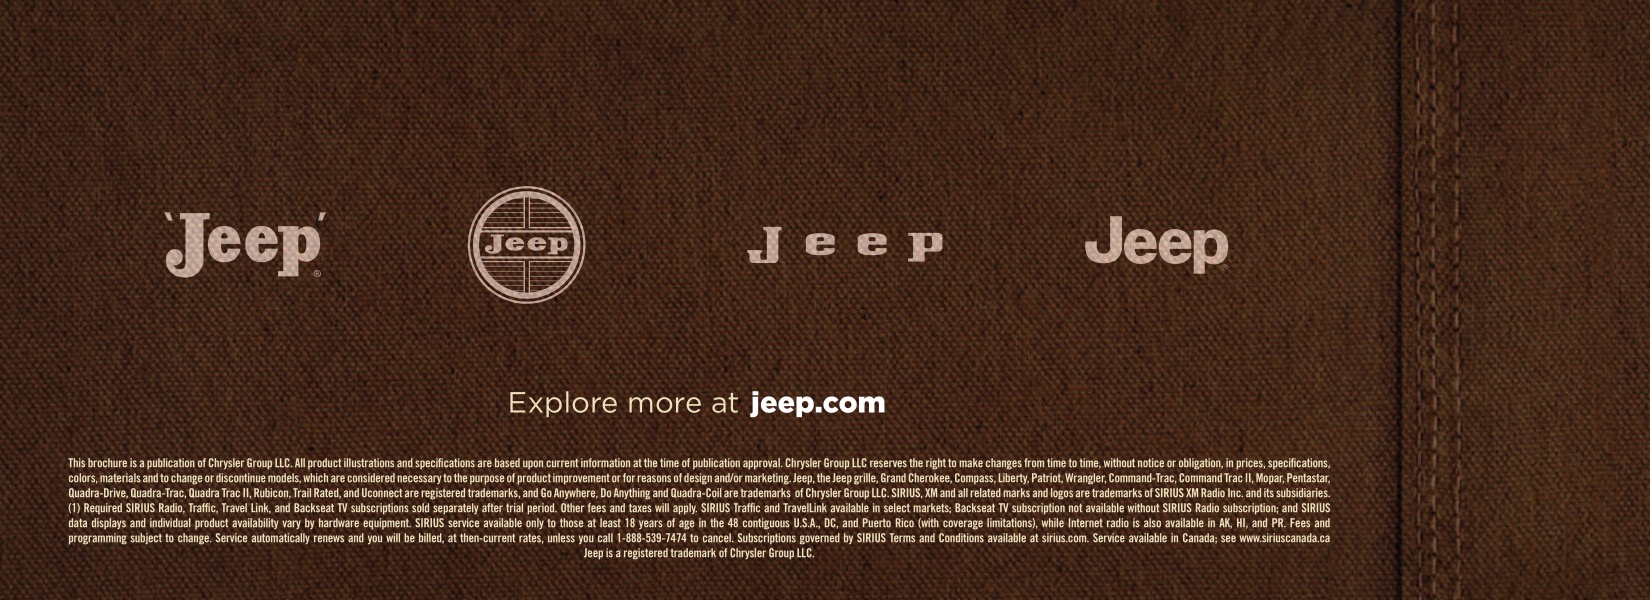 2011 Jeep Full Line Brochure Page 9